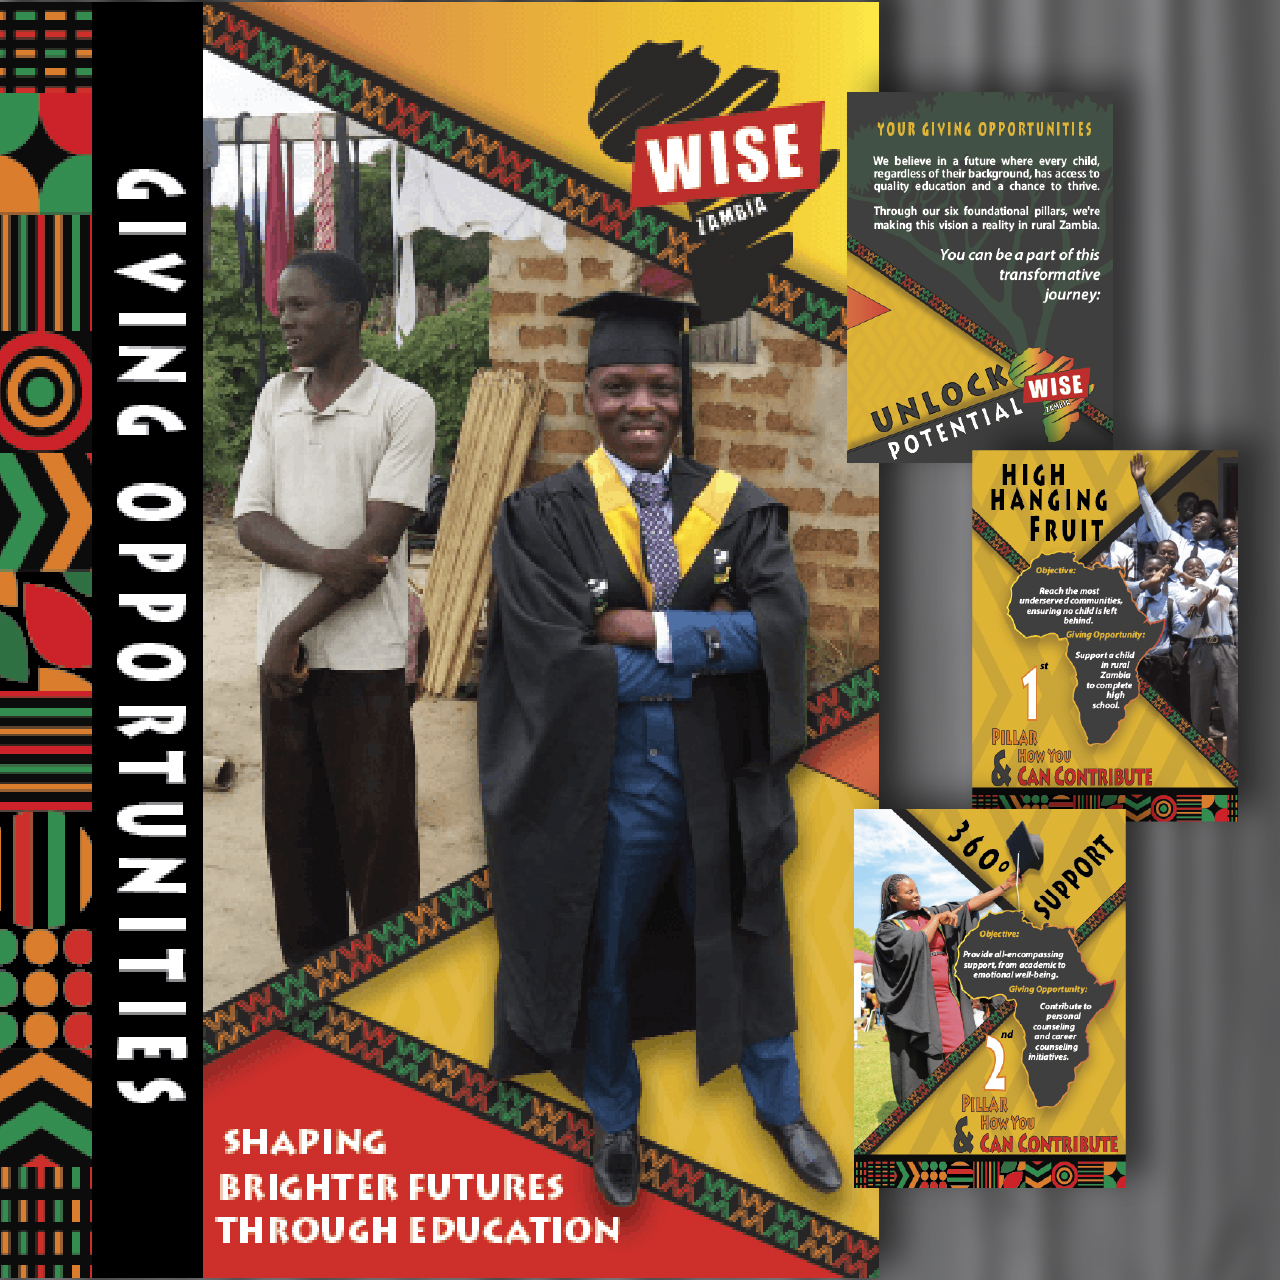 Brochure showing African boy in village and later in his graduation cap and gown.